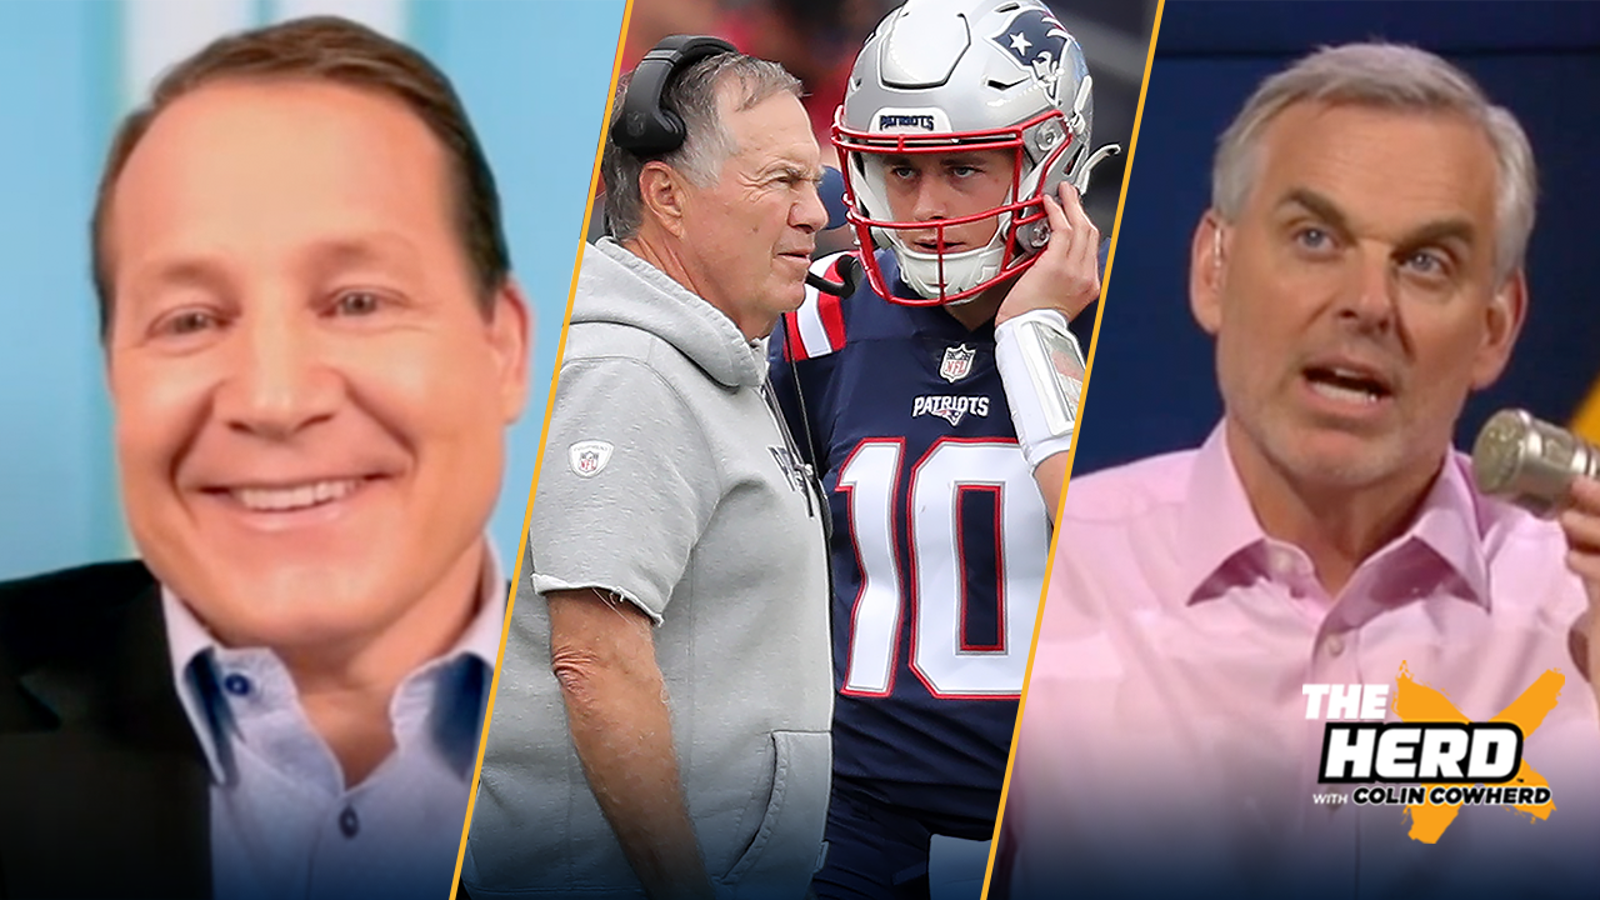 Jones trade rumors fueled by souring relationship with Belichick